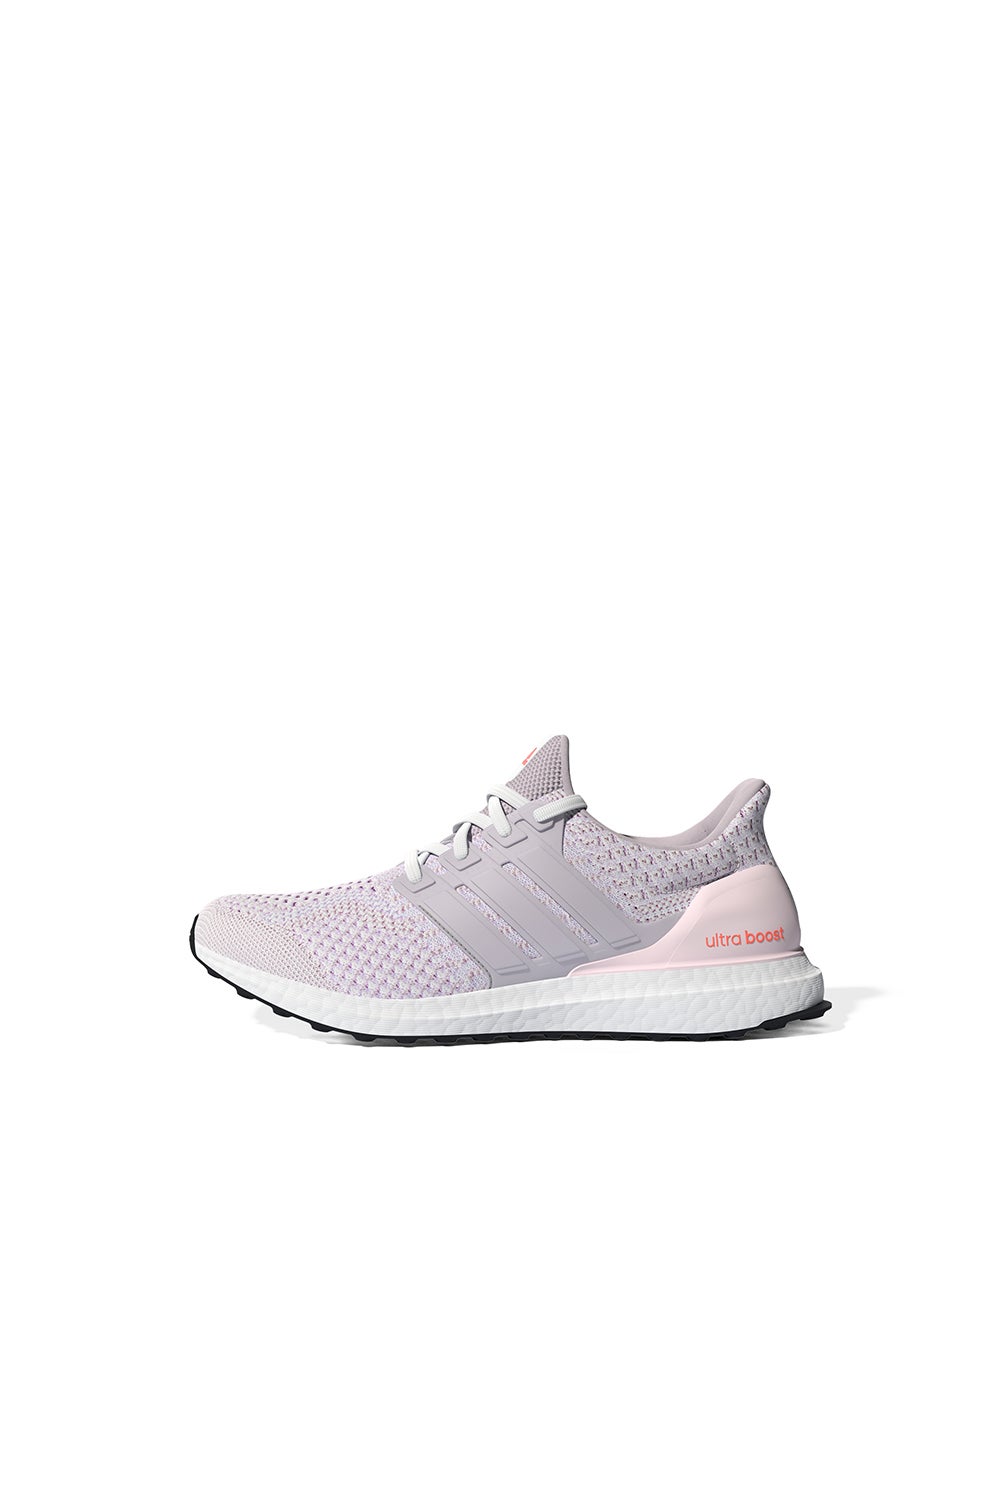 adidas Ultraboost 5.0 DNA Shoes Almost Pink